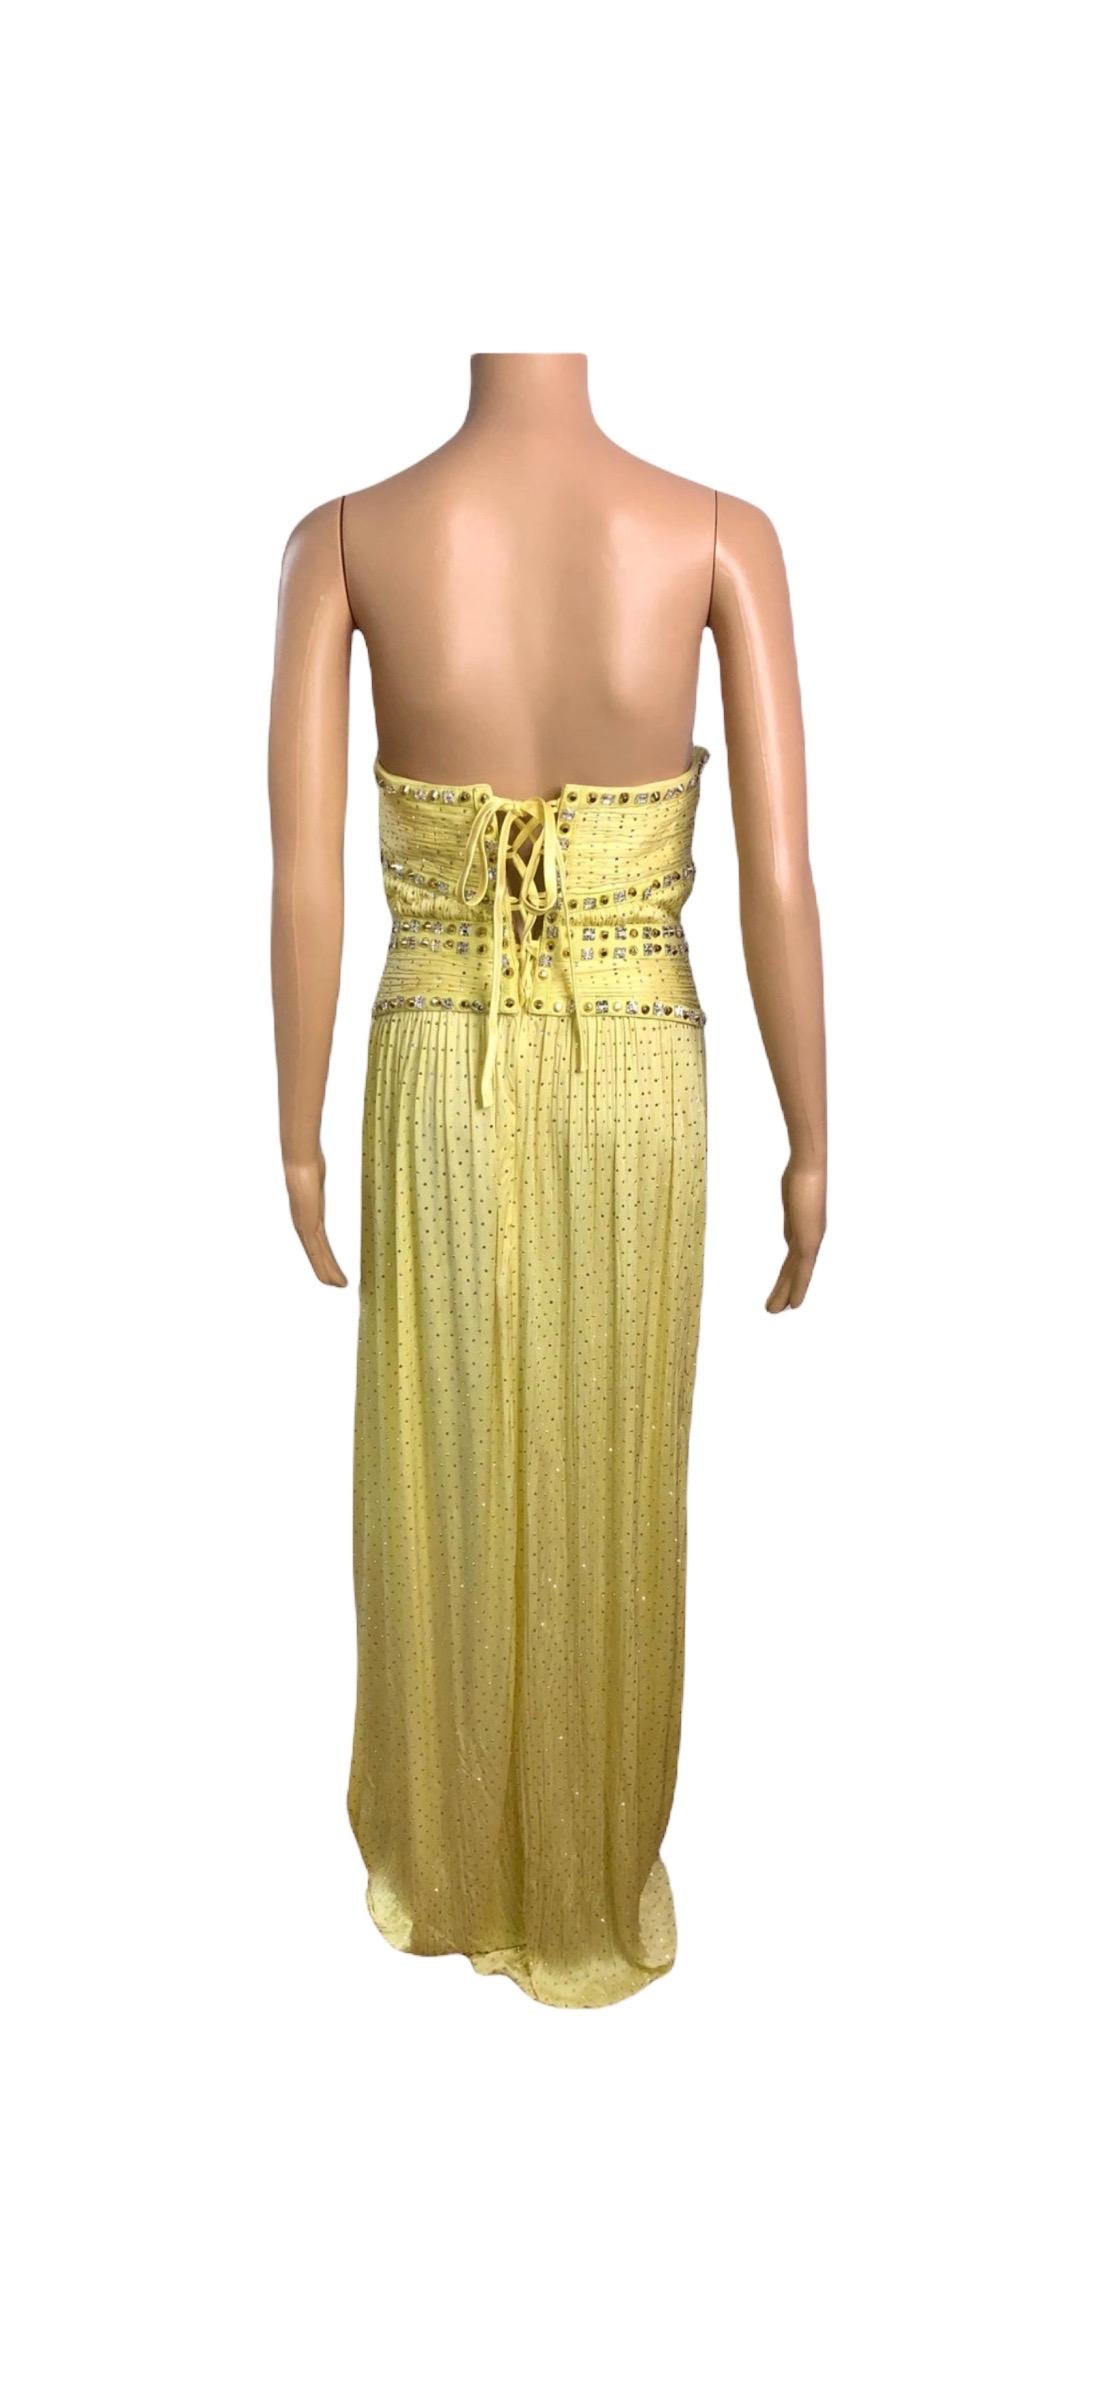 Versace S/S 2012 Runway Bustier Corset Crystal Embellished Evening Dress Gown  For Sale 7